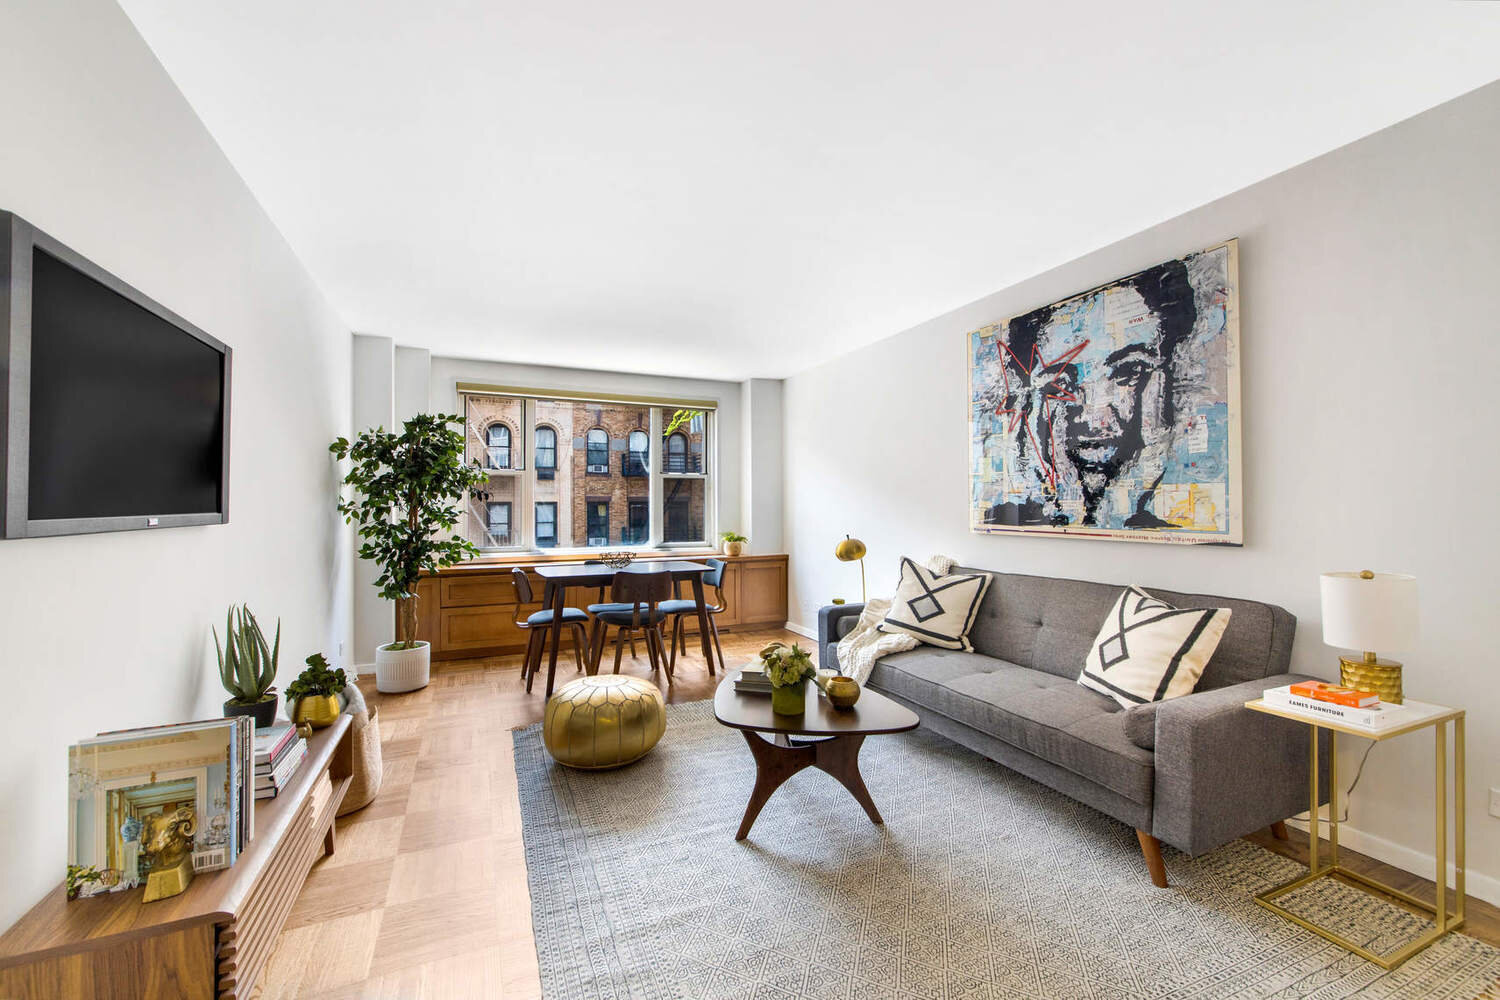 435 East 77th Street, 4F Sold 11/5/19